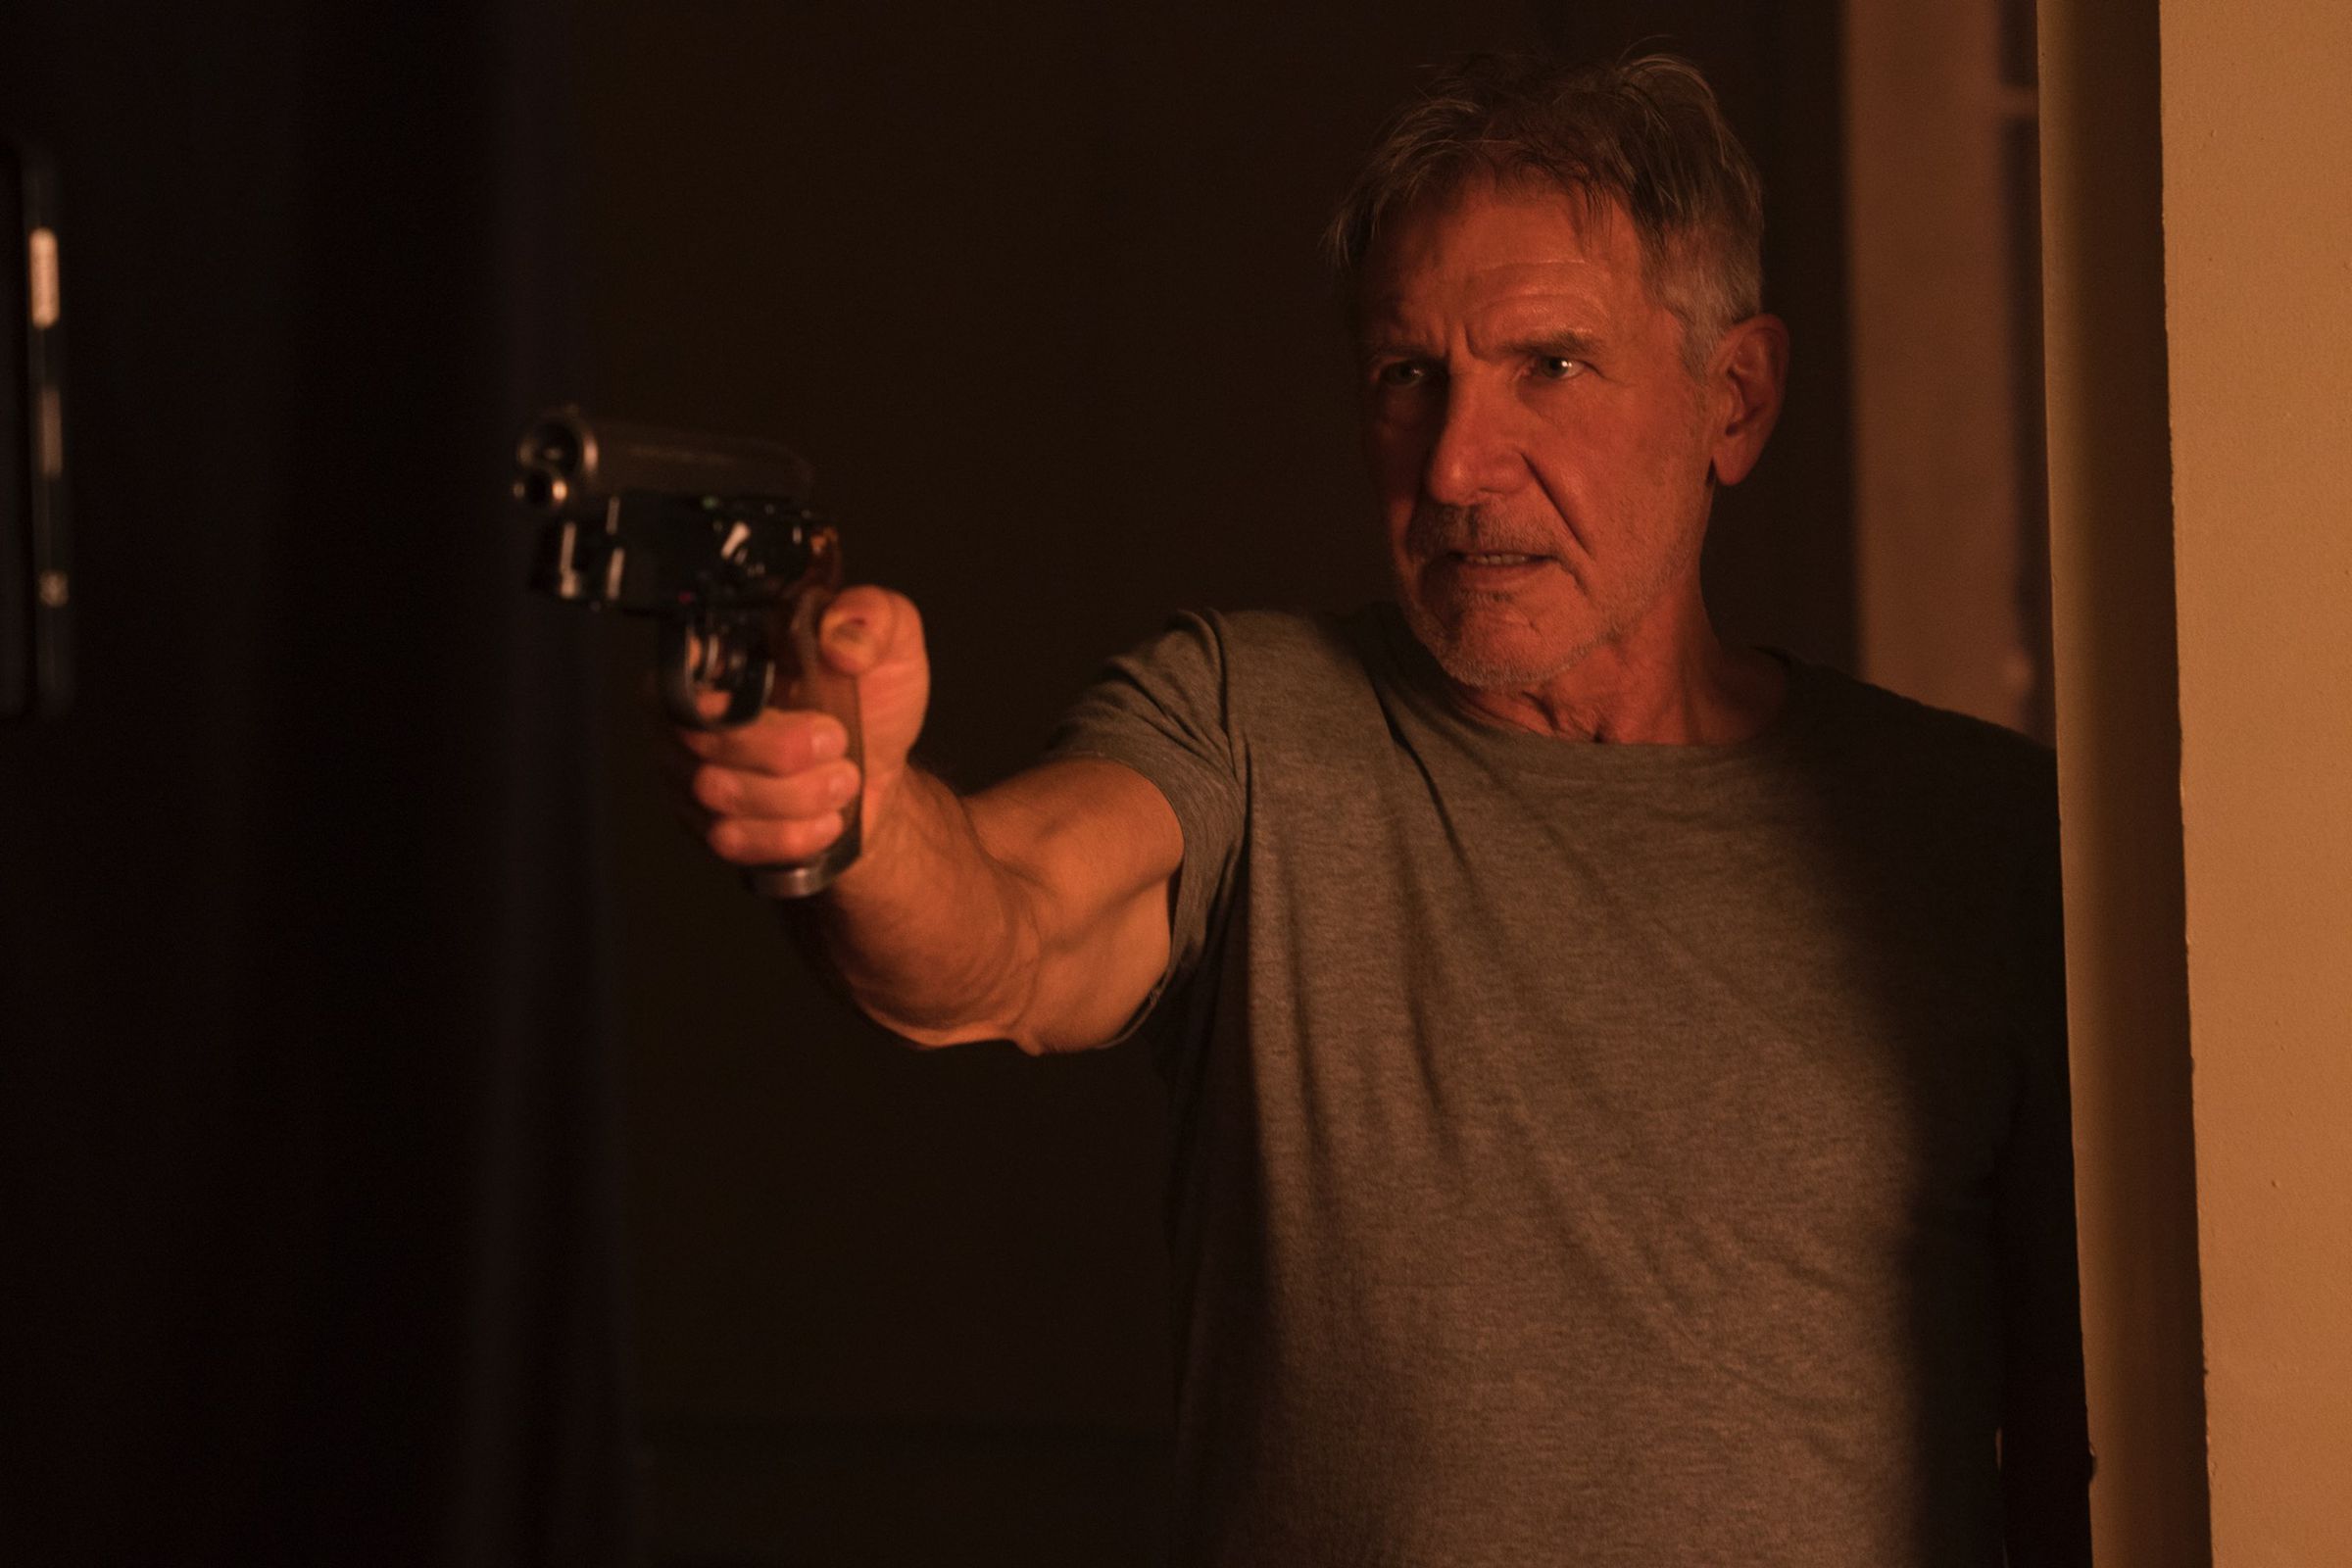 Harrison Ford, as Deckard in Blade Runner 2049, stands in a doorway and points a gun.